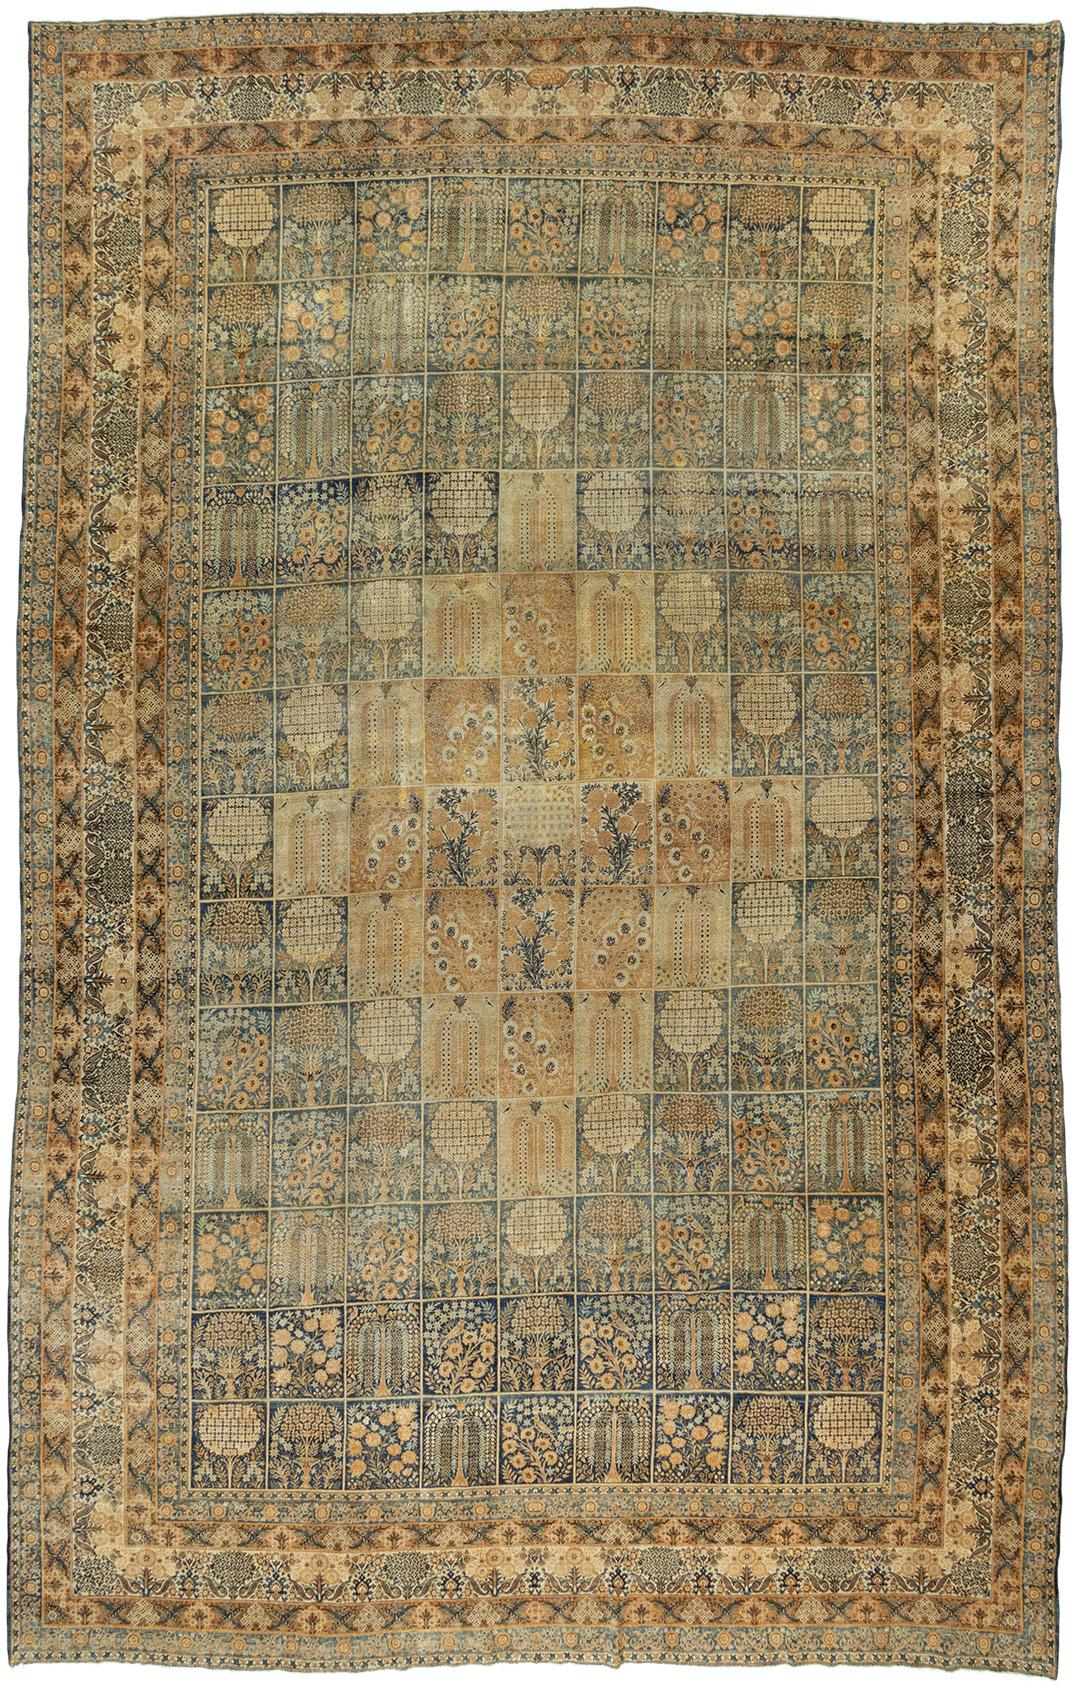 Antique Persian Kerman rug 11'11 x 18'1. A fine Kerman Garden Design Rug. The intricate field divided into rows of nine individual designs within their own frame which are repeated within the overall pattern. There are several borders surrounding